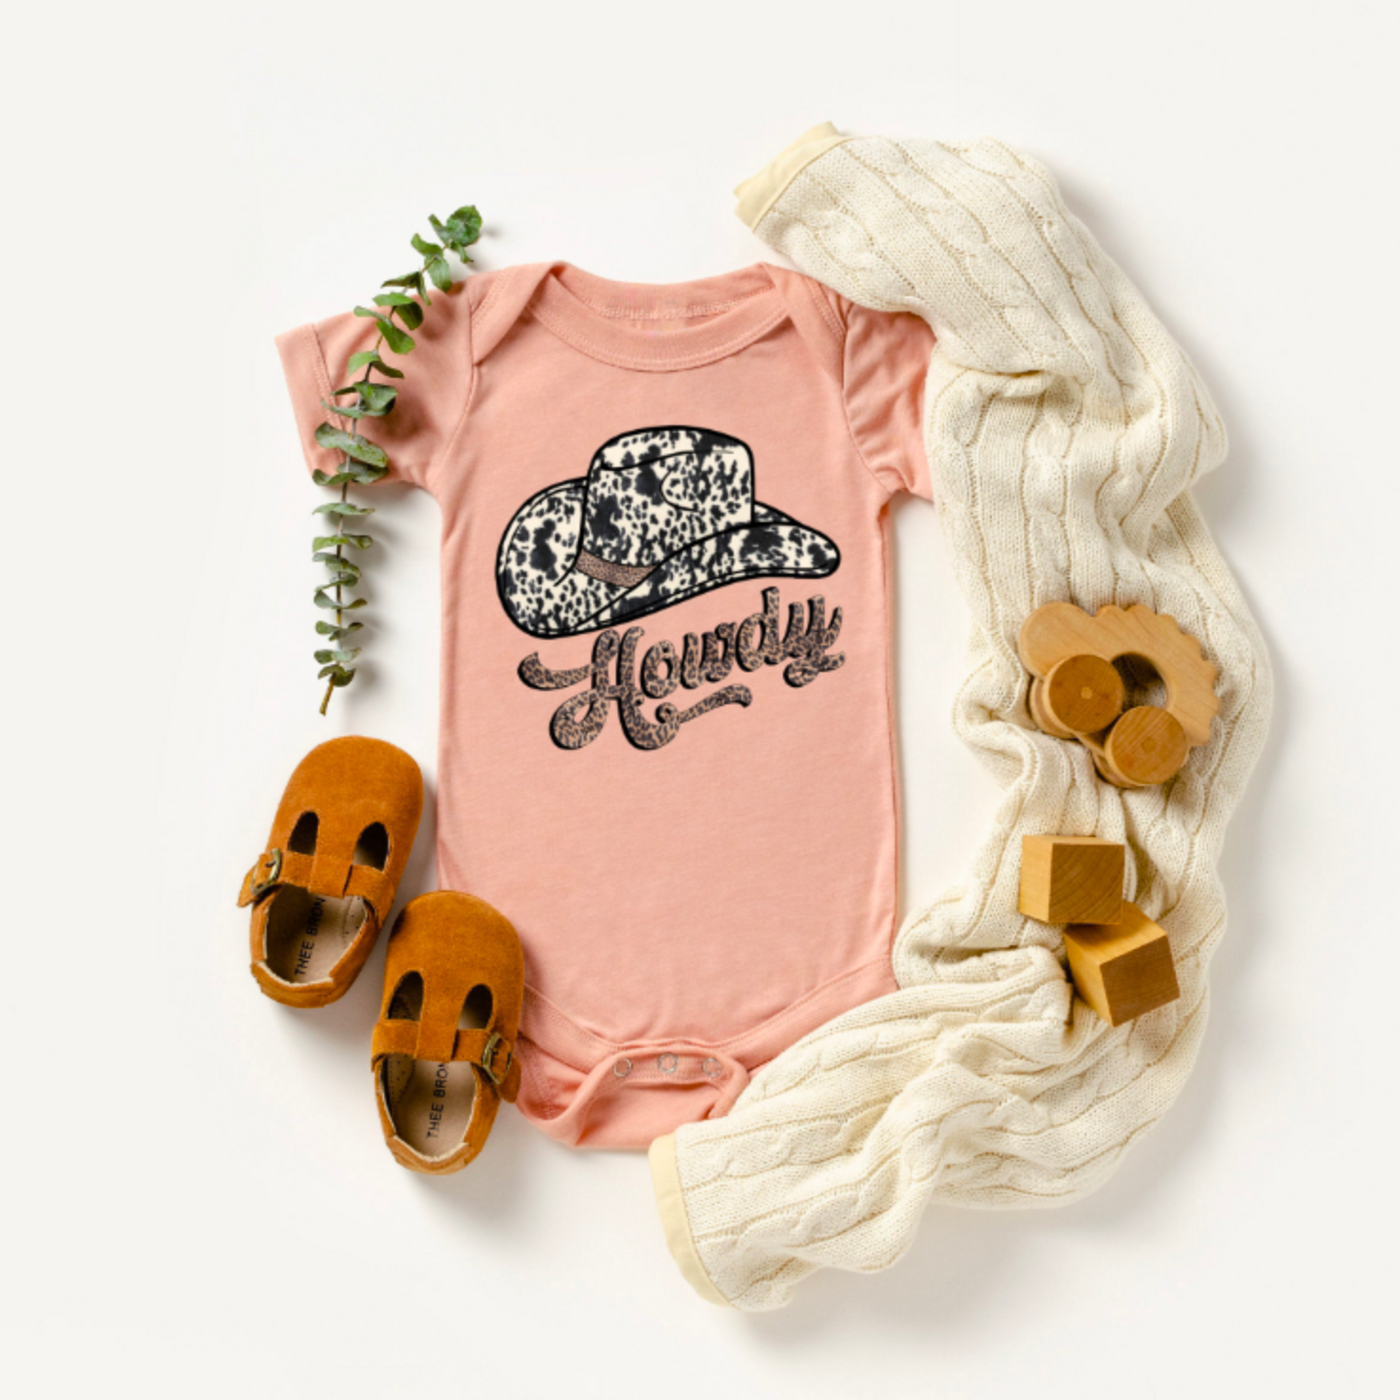 "Howdy Hat" Infant/Toddler/Youth T-shirt